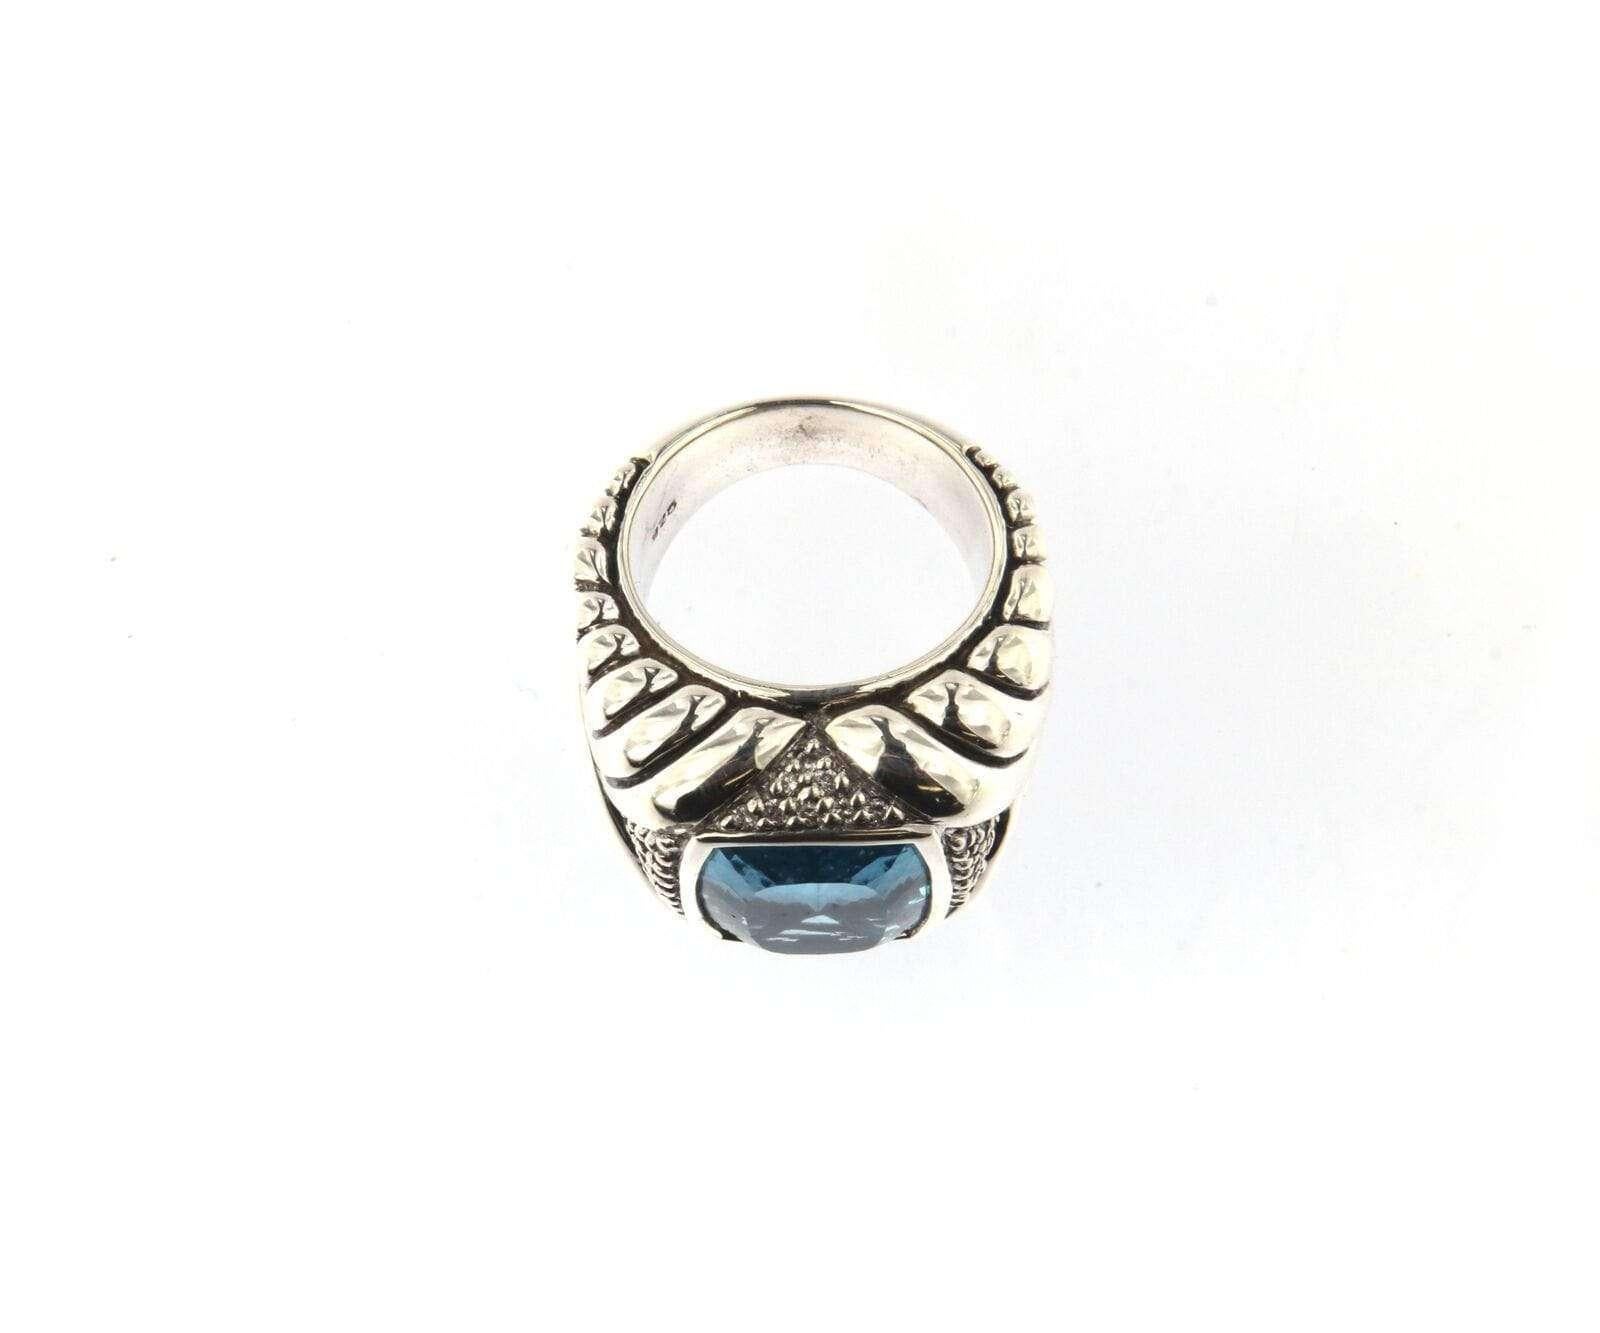 Scott Kay Enormous Blue Topaz Ring with 0.3 CTW Diamonds in Sterling

Scott Kay Blue Topaz & Diamond Ring
Sterling Silver
Diamond Weight: Approx. 0.30 CTW
Topaz Size: Approx. 11.5 X 17.25 MM
Ring Size: 7 (US)
Weight: Approx. 32.5 Grams
Stamped: SK,